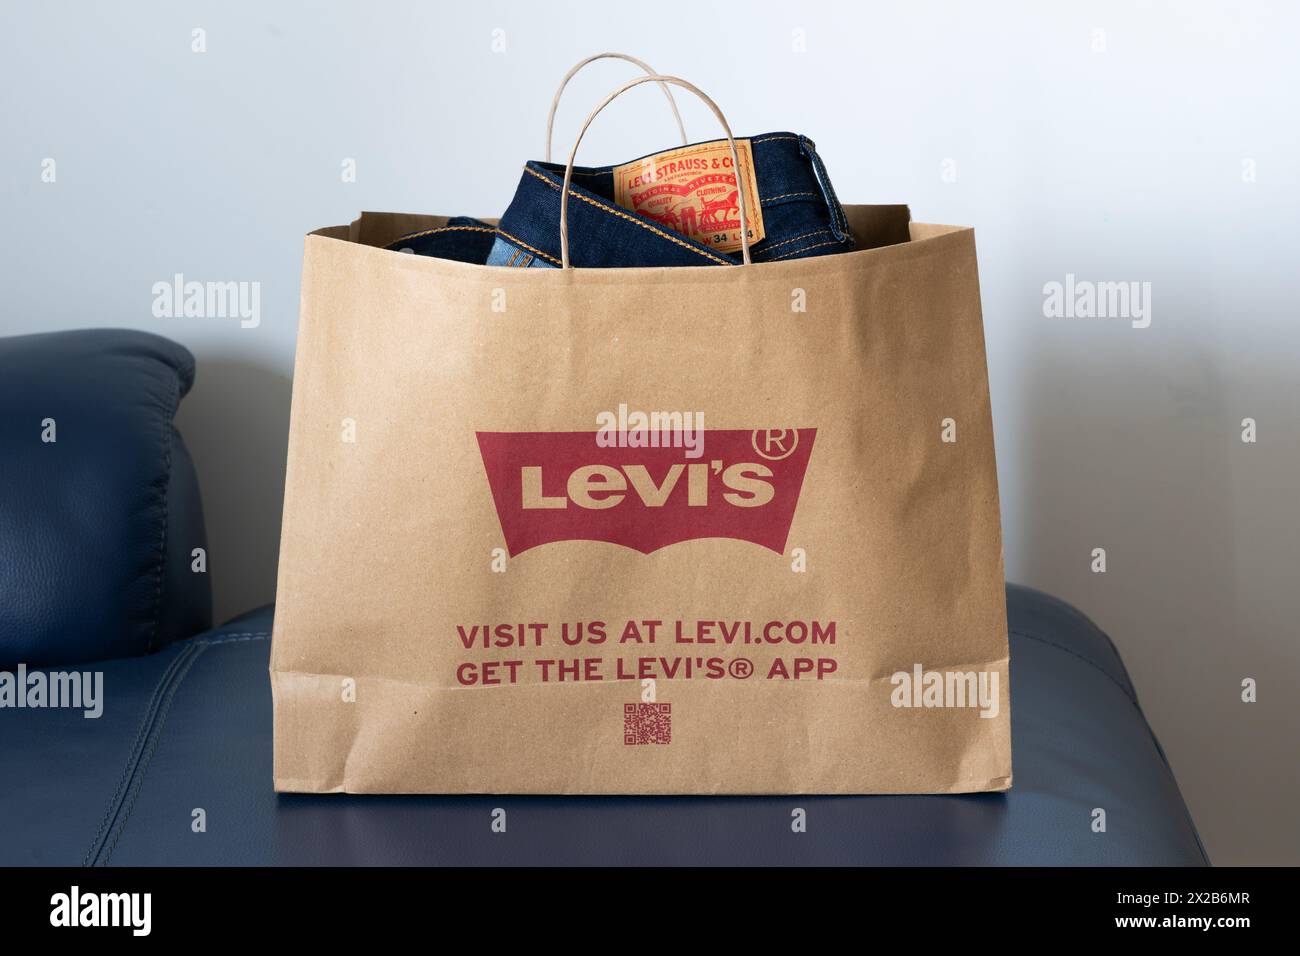 A paper bag with Levi Strauss & Co jeans inside purchased from a UK Levi's store. Concept: brought clothing, sustainable shopping bag, Levi's logo Stock Photo